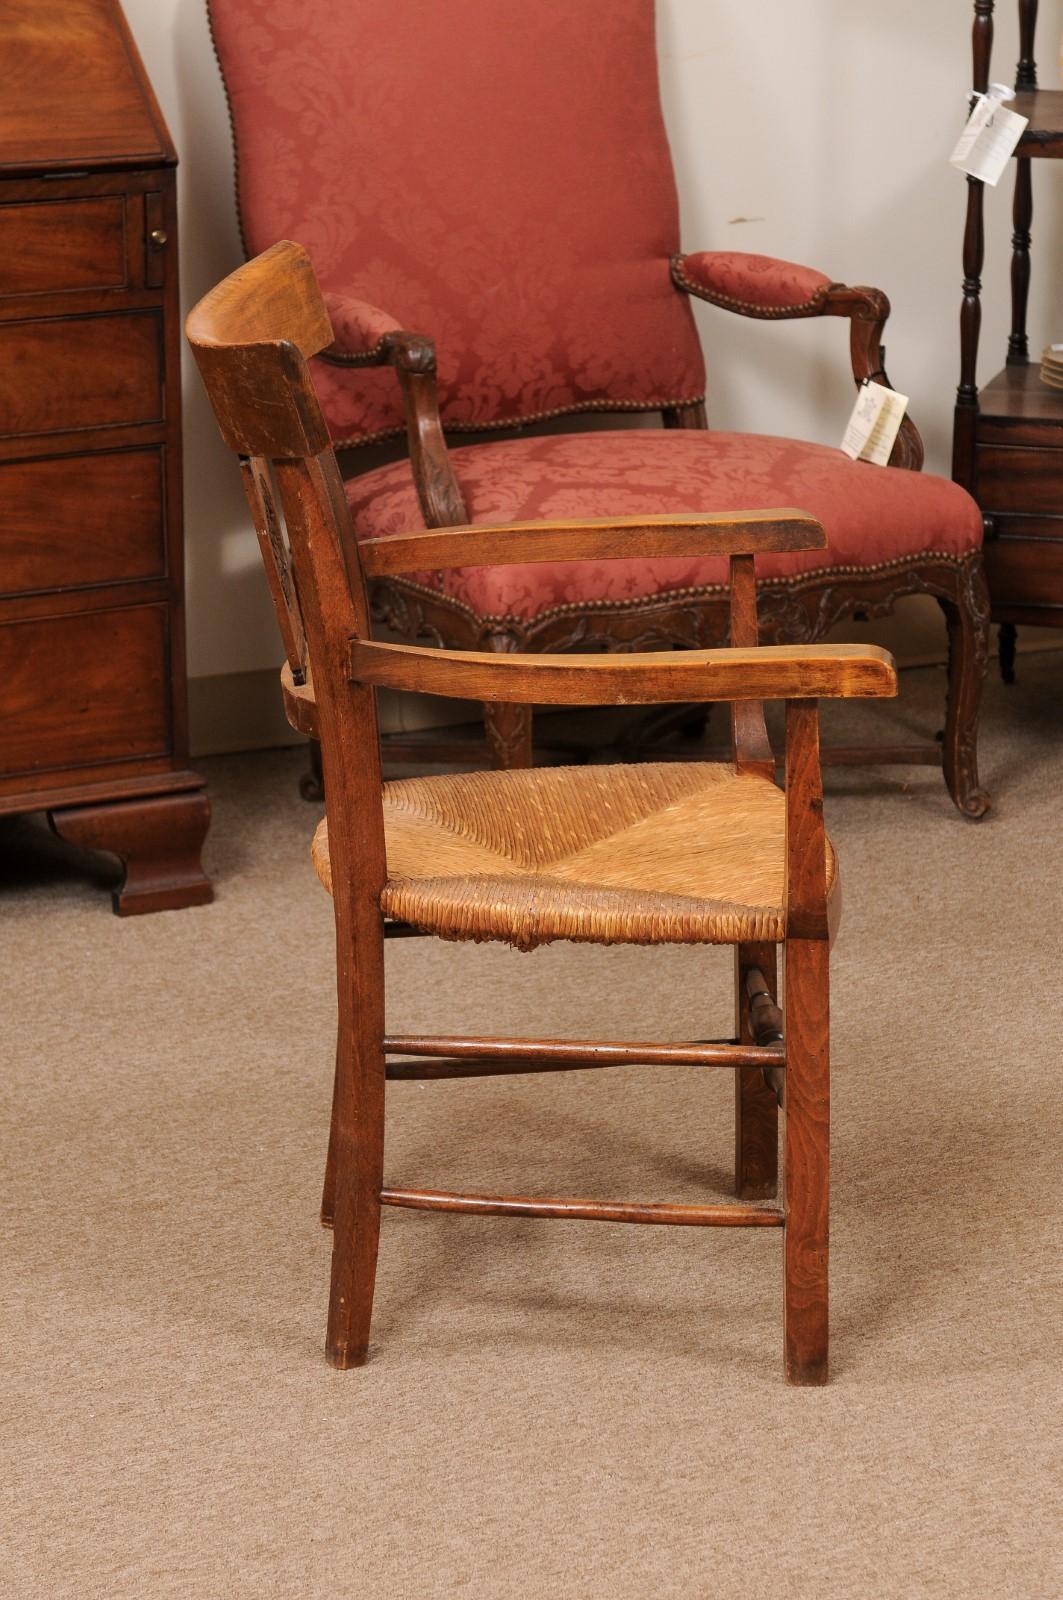 Fruitwood Rush Seat Armchair with Flower Basket Backsplat, Italy ca. 1850 For Sale 7